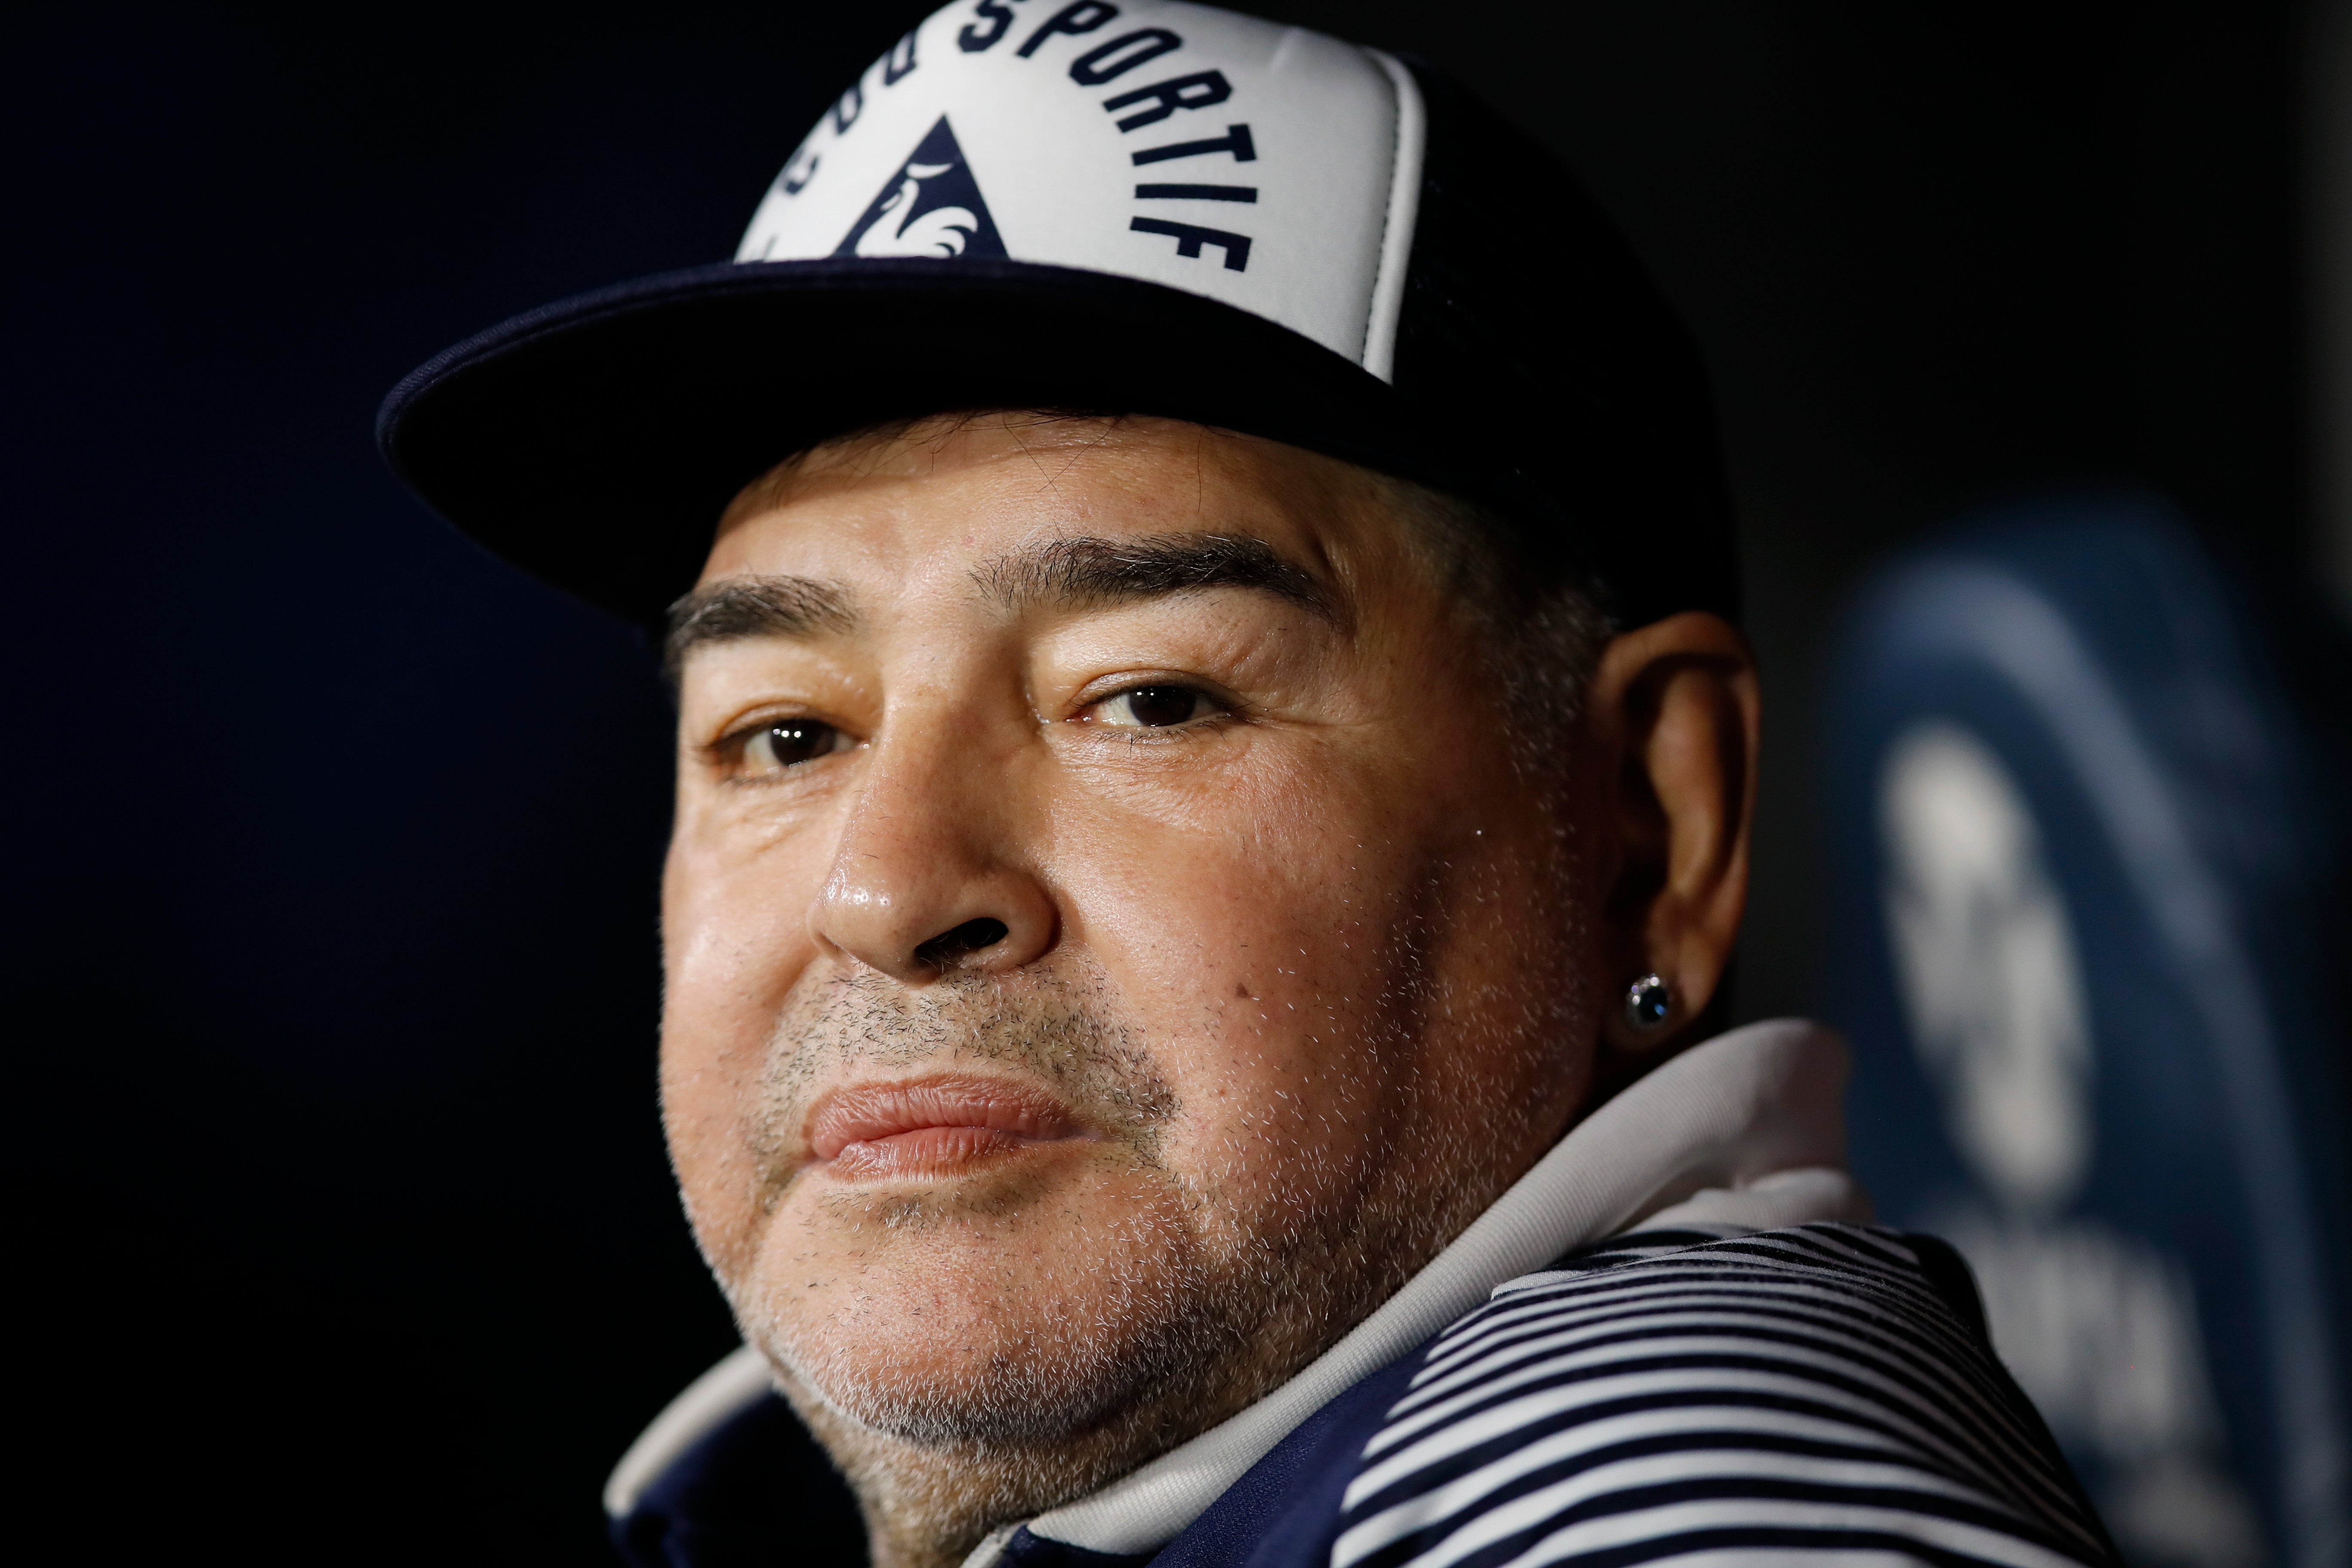 Maradona was struck down at the start of the month by ill health